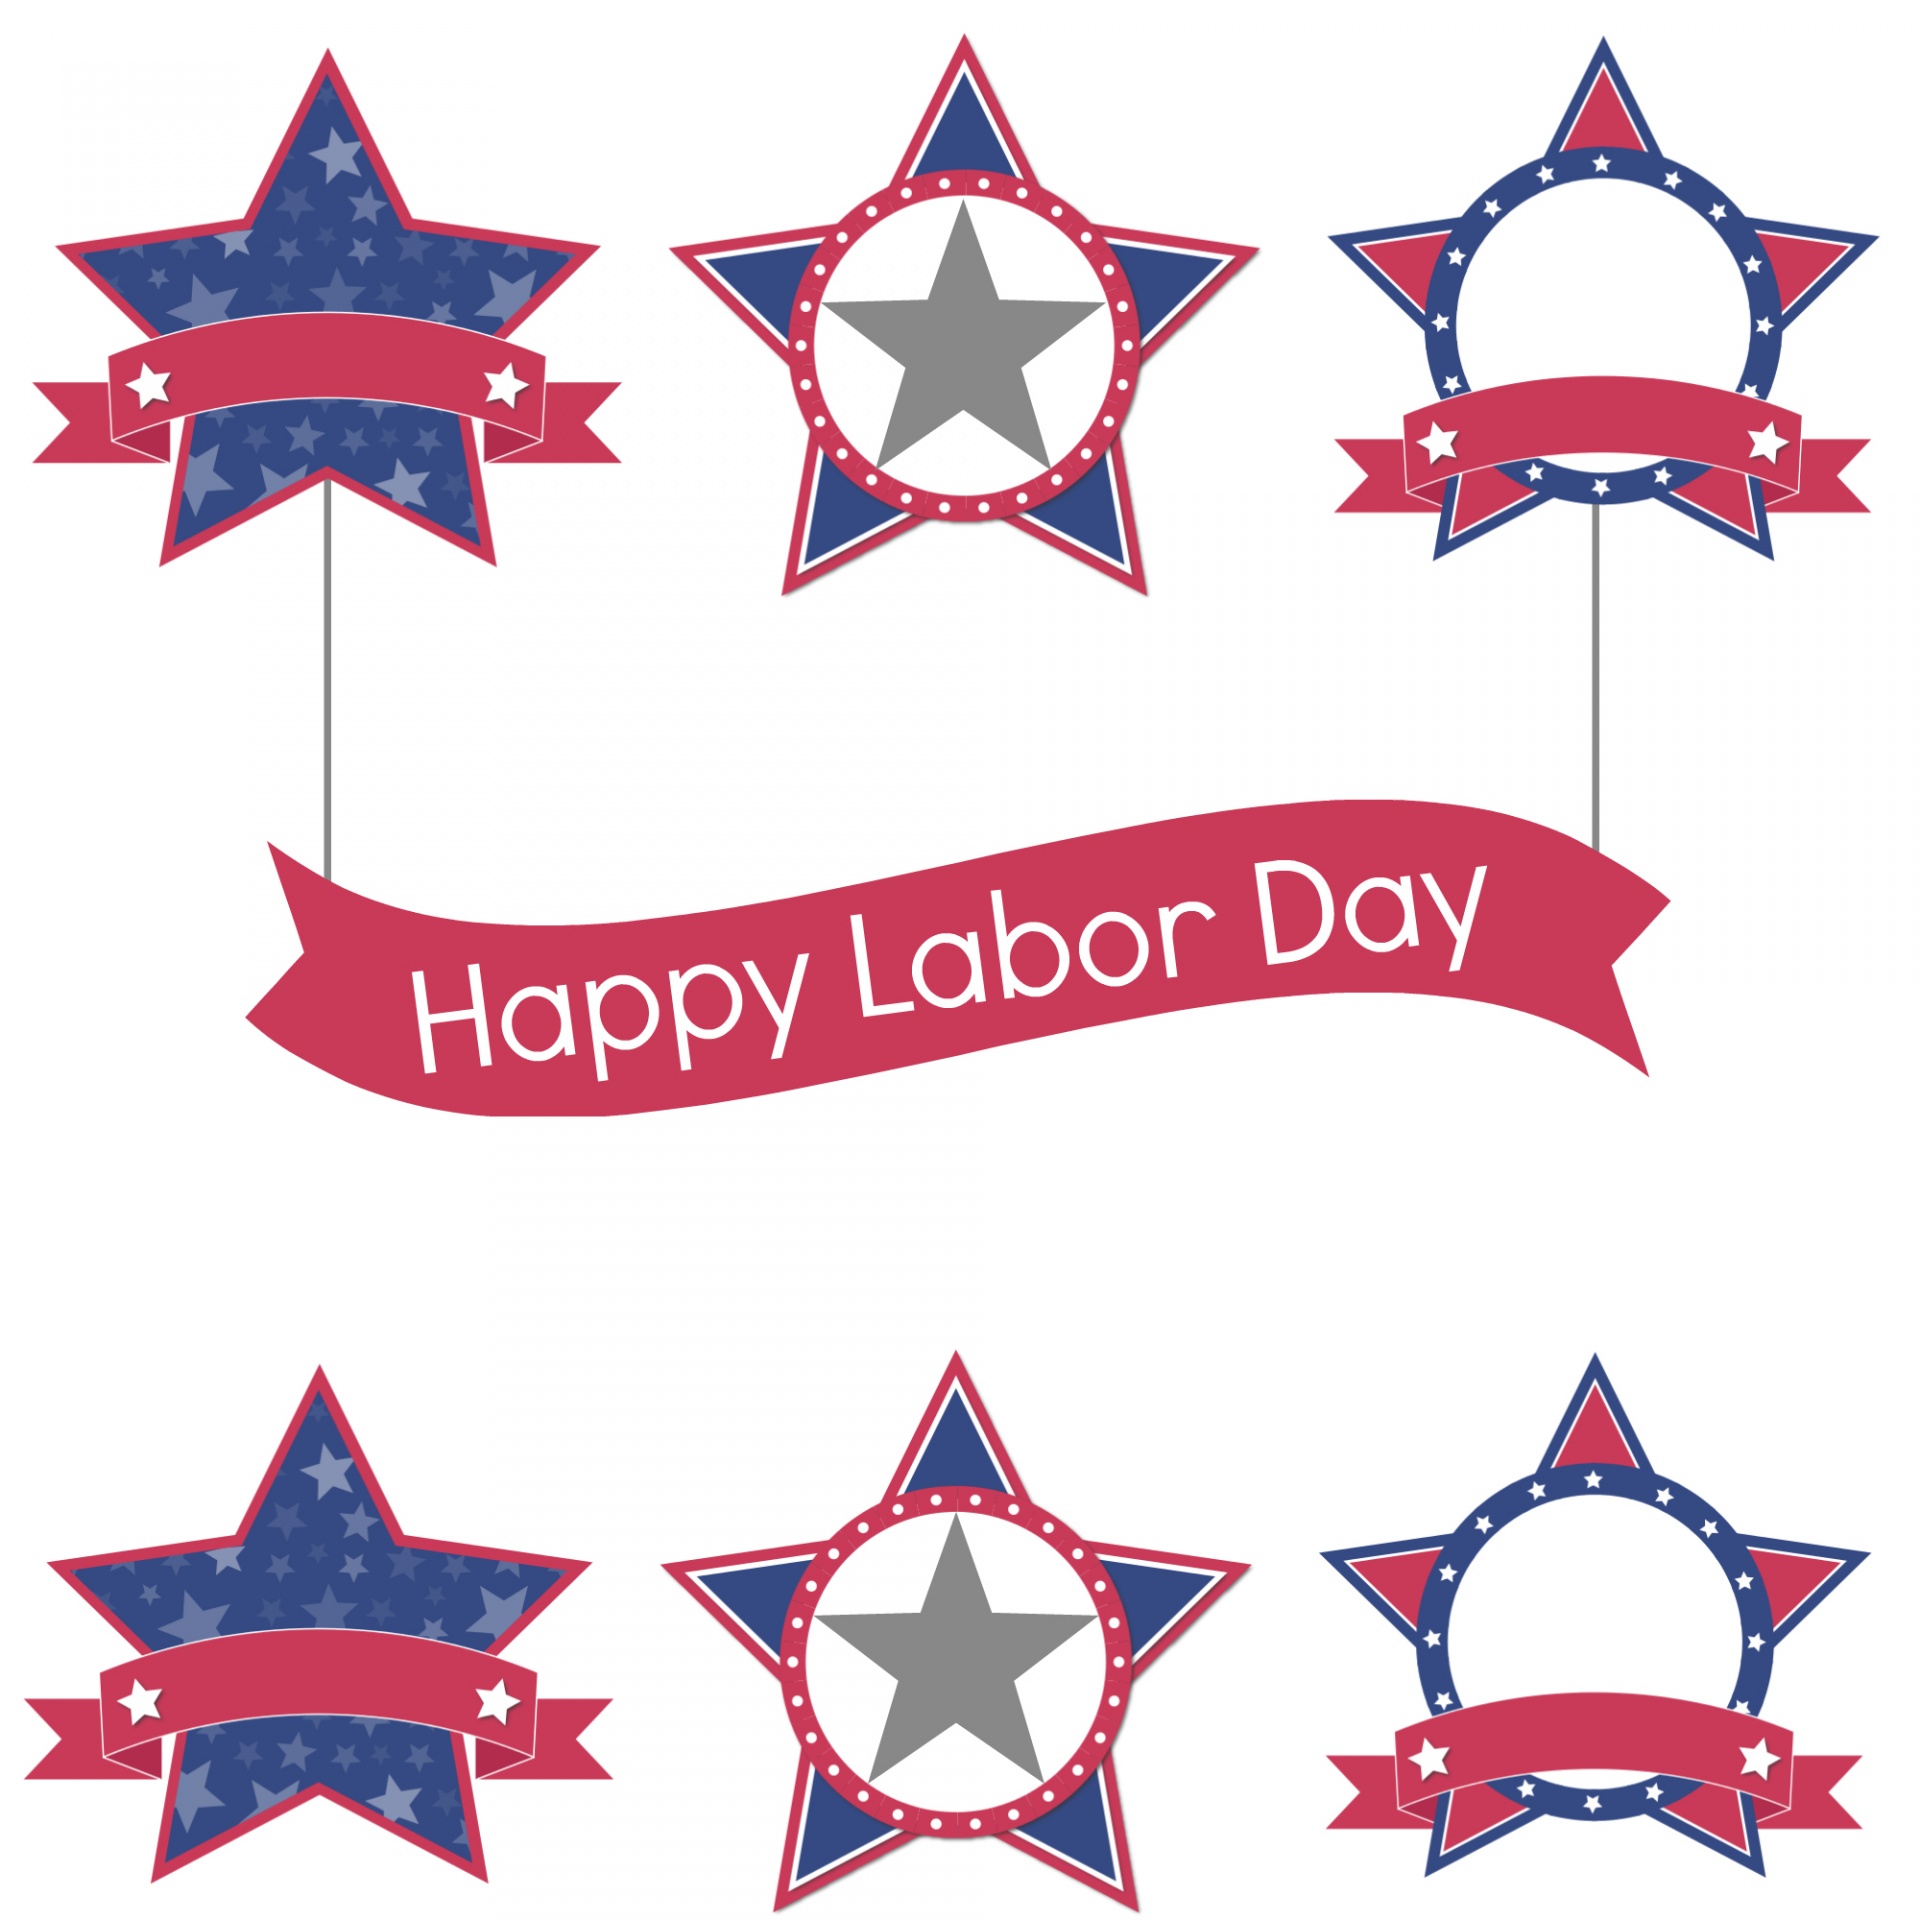 free clipart images labor day - photo #33